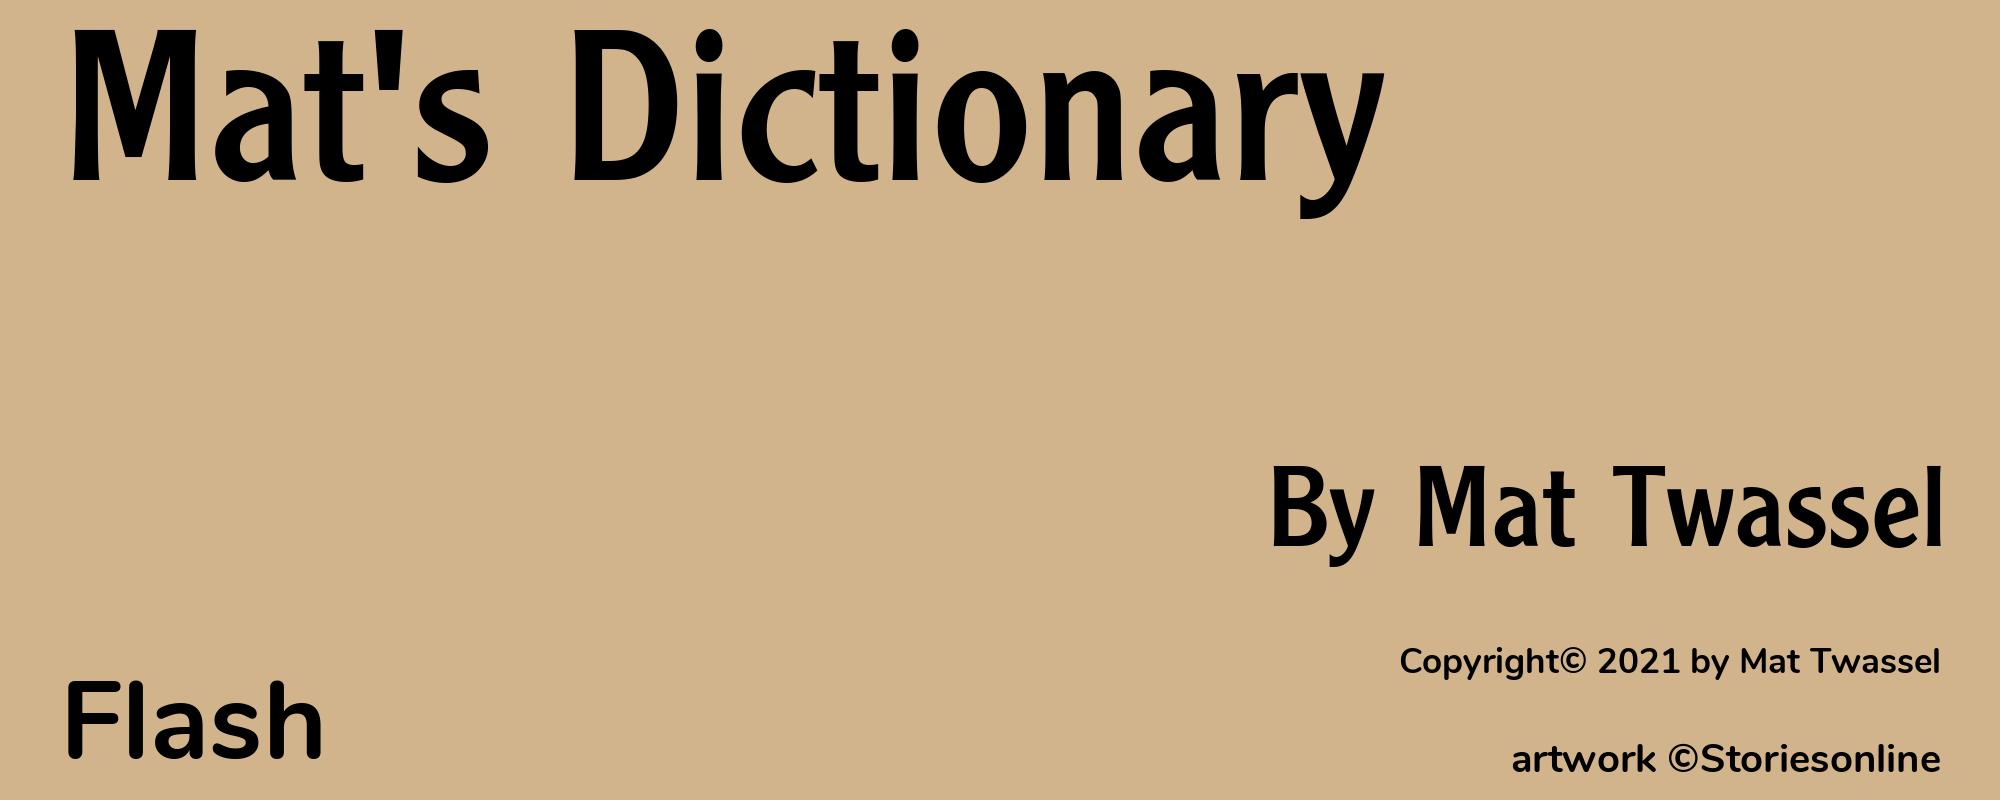 Mat's Dictionary - Cover